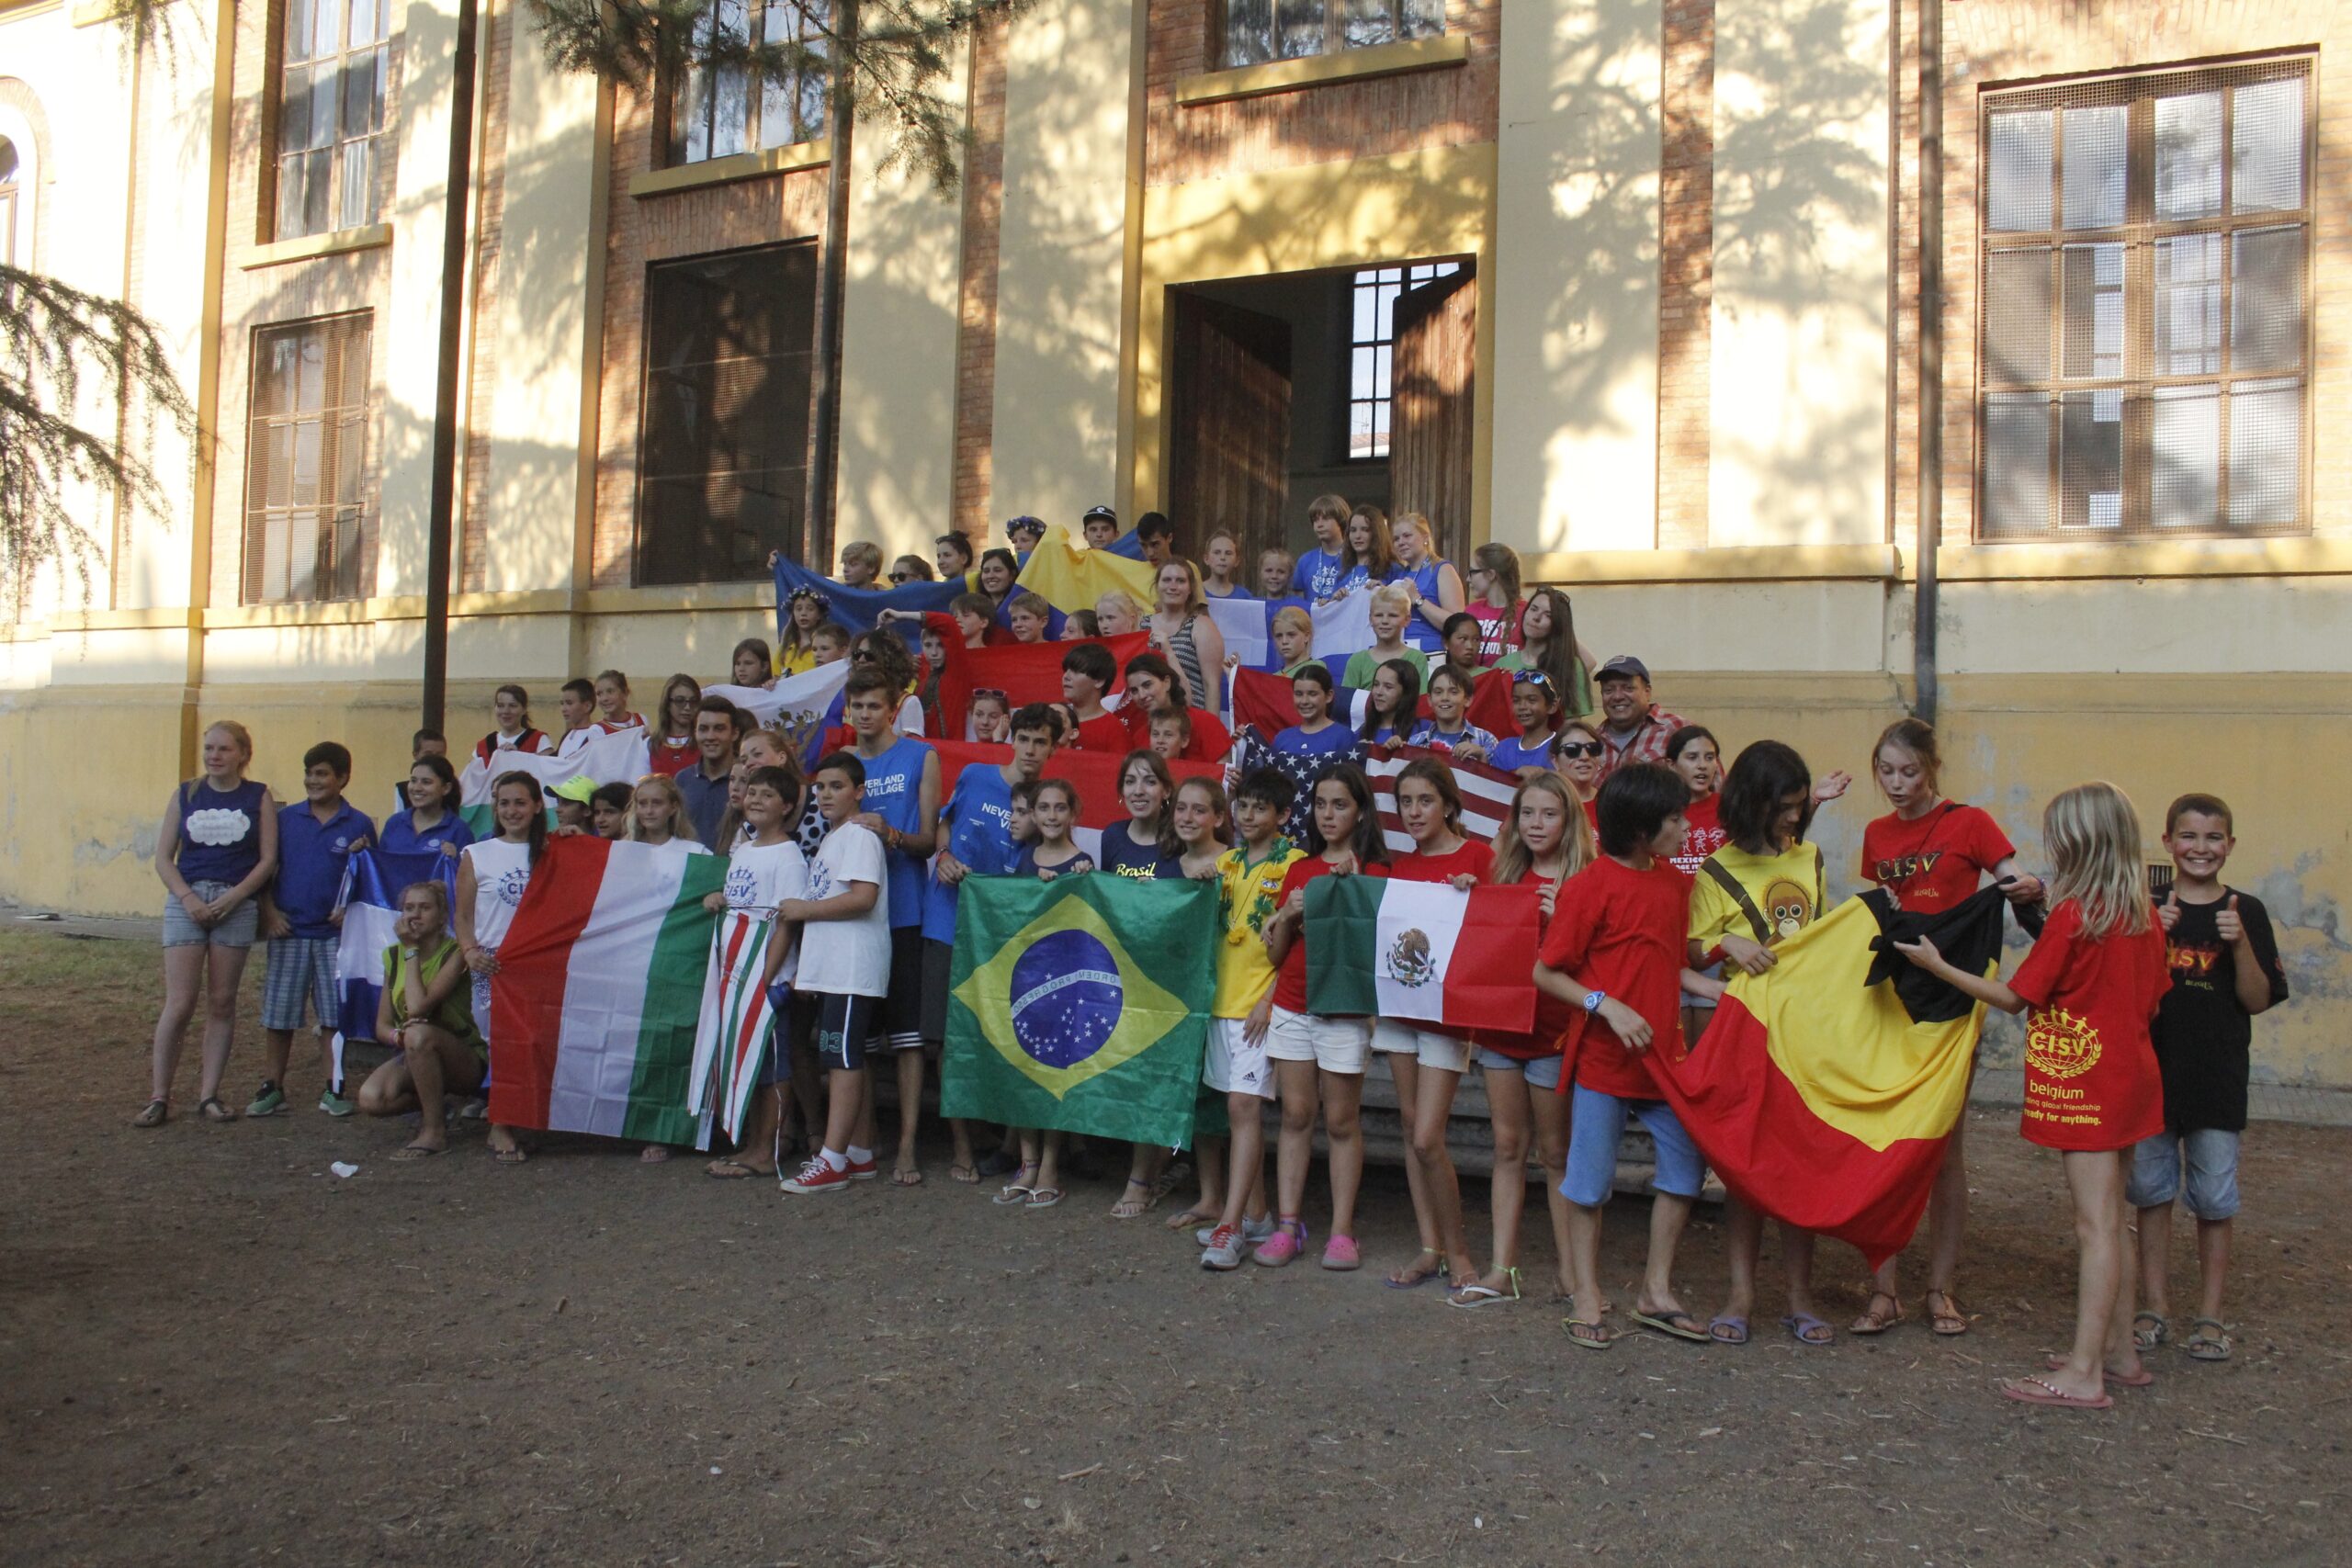 Picture of campers at village in Italy holding flags representing many countries